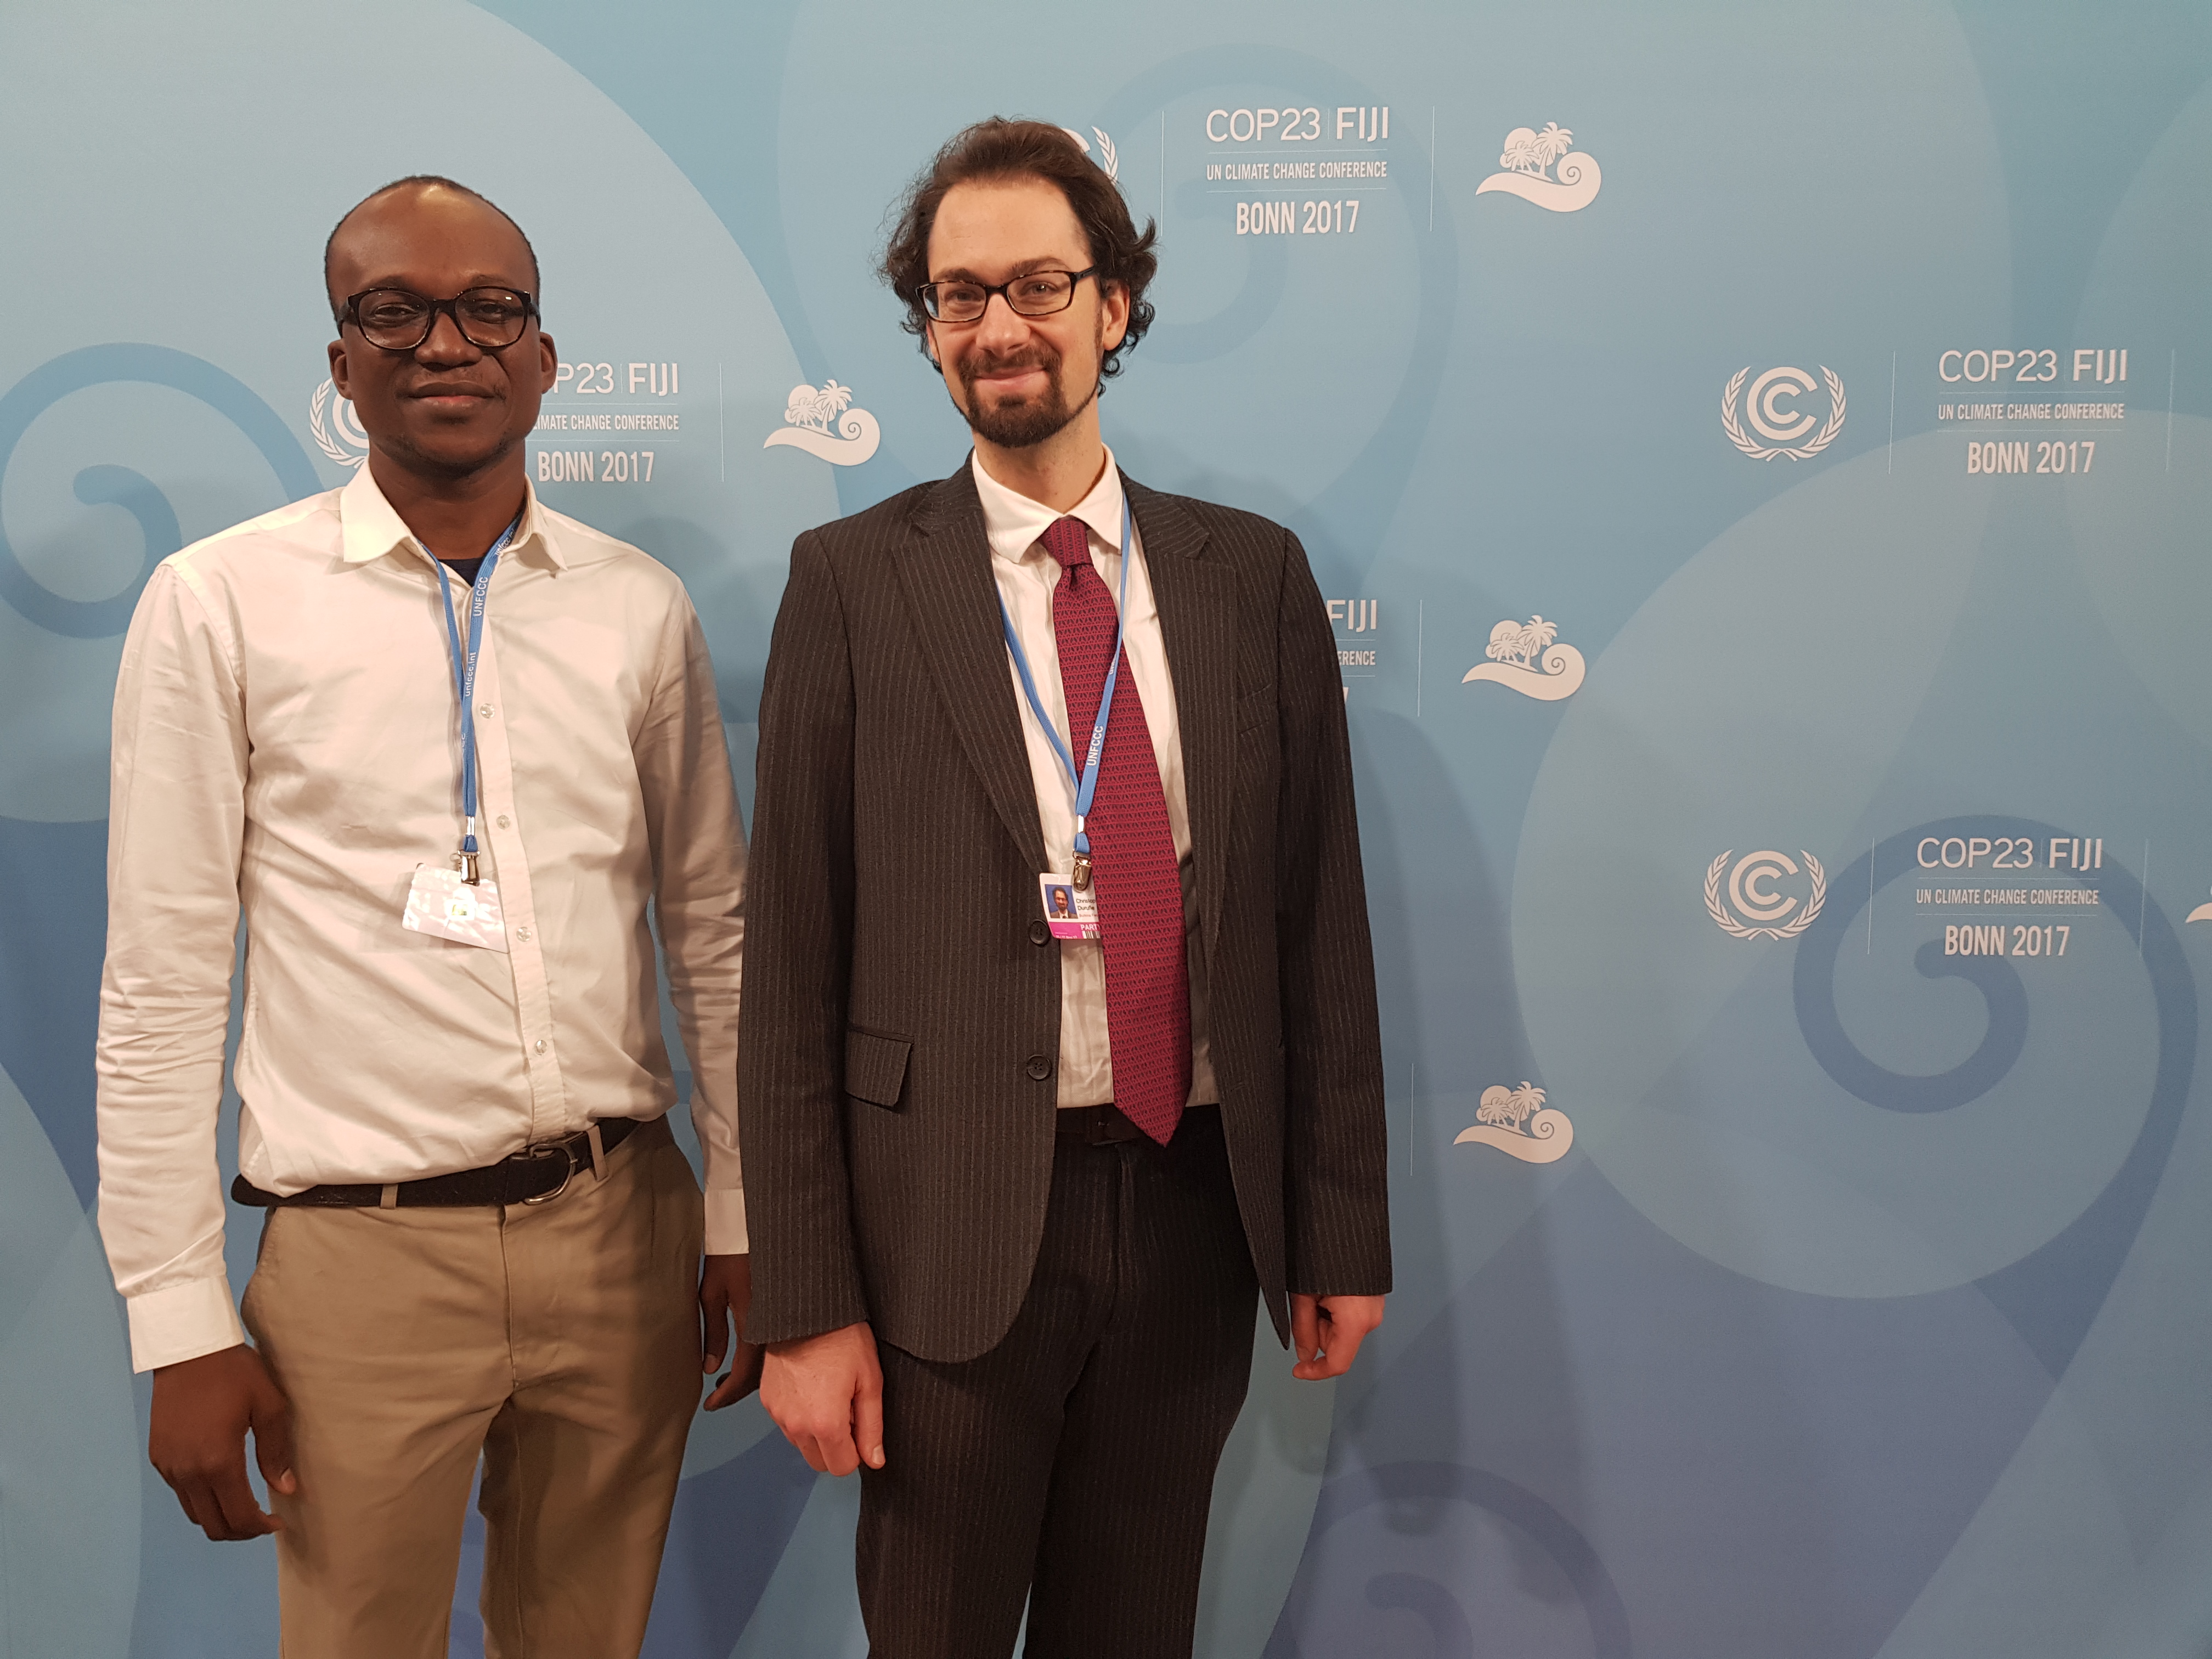 Christopher Campbell-Duruflé at the twenty-third session of the Conference of the Parties (COP 23), pictured with Dr. Joël Korahire, former Director of Environmental Treaties, Government of Burkina Faso.